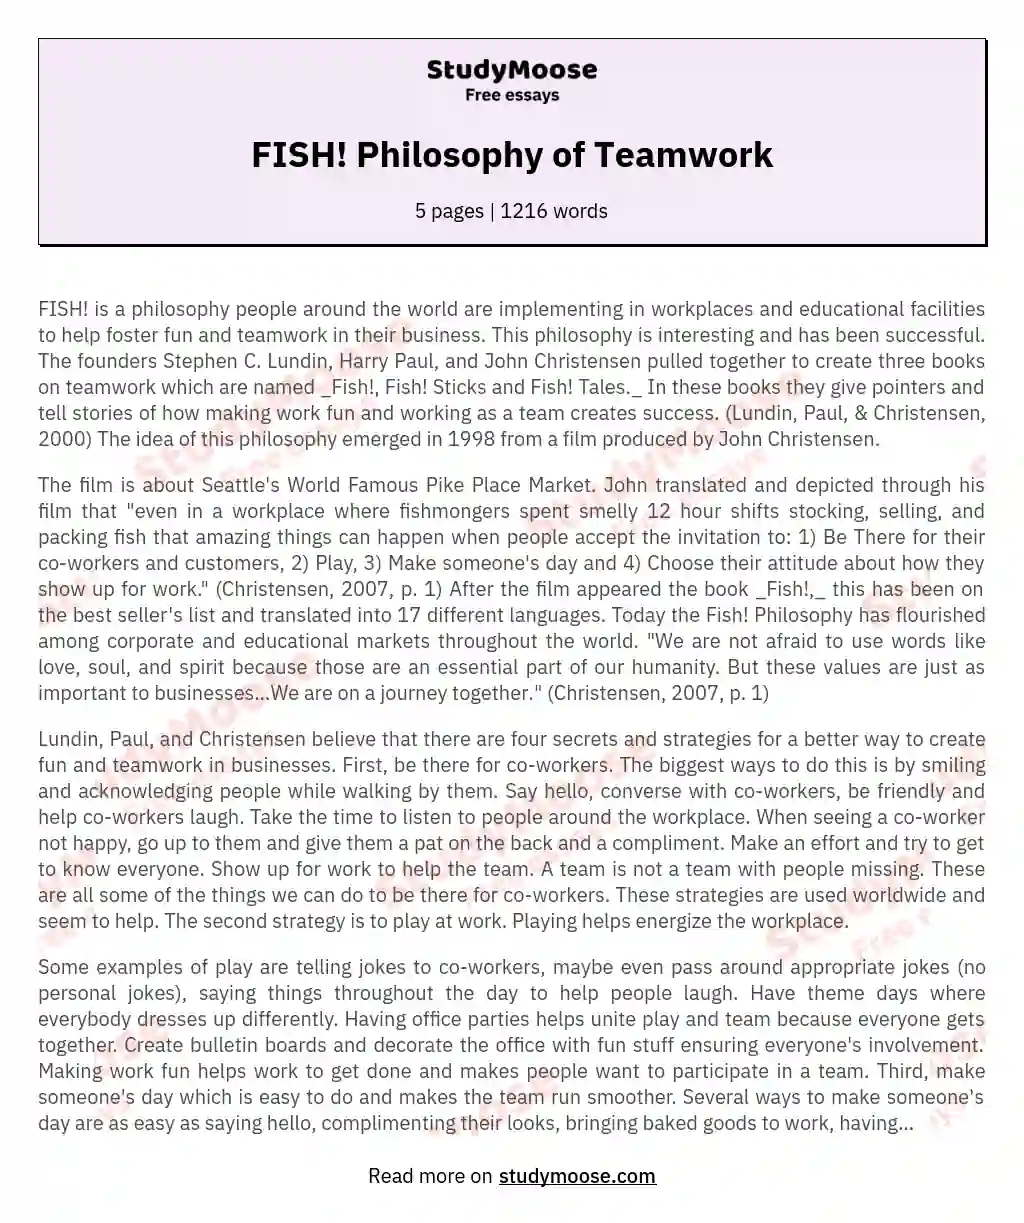 The Fish! Philosophy: A Catalyst for Fun and Teamwork essay